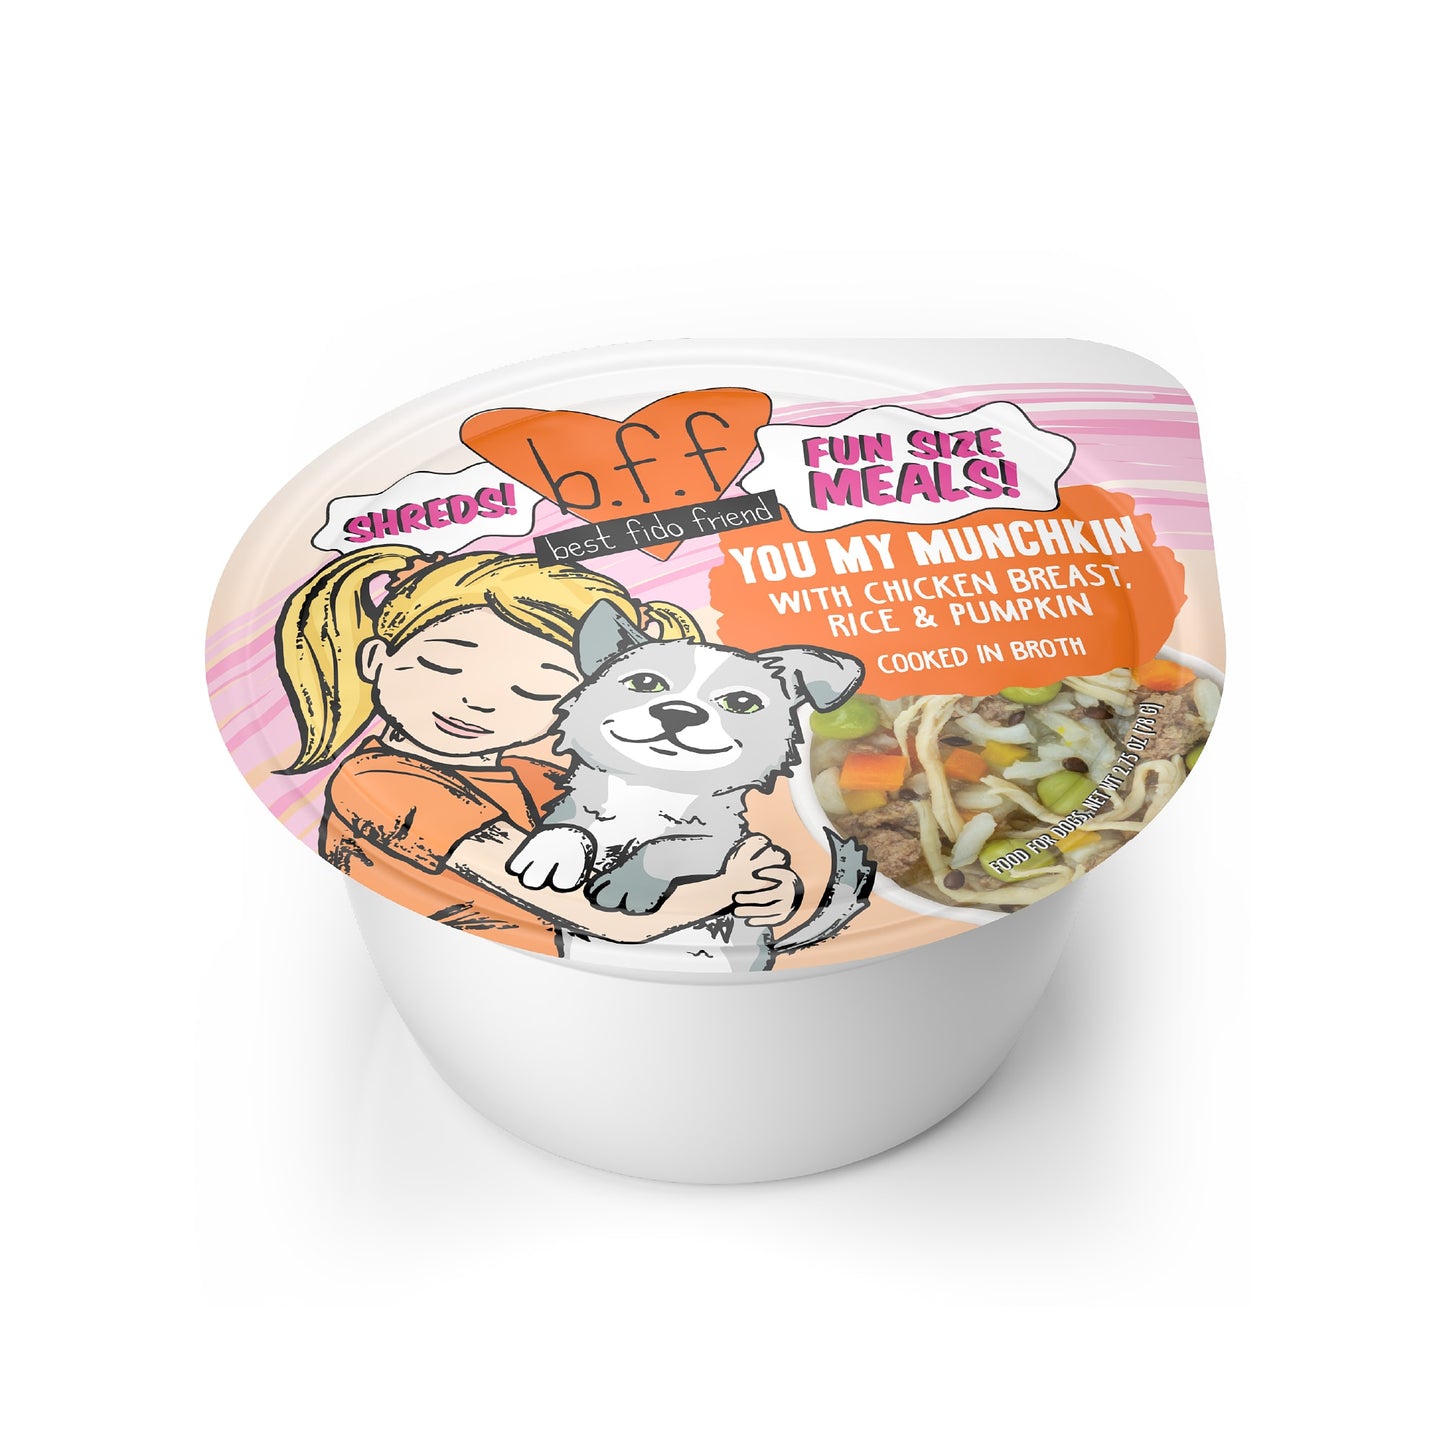 B.F.F. Fun Size Meals! You My Munchkin with Chicken Breast, Rice & Pumpkin in Broth Wet Dog Food, 2.75 oz.